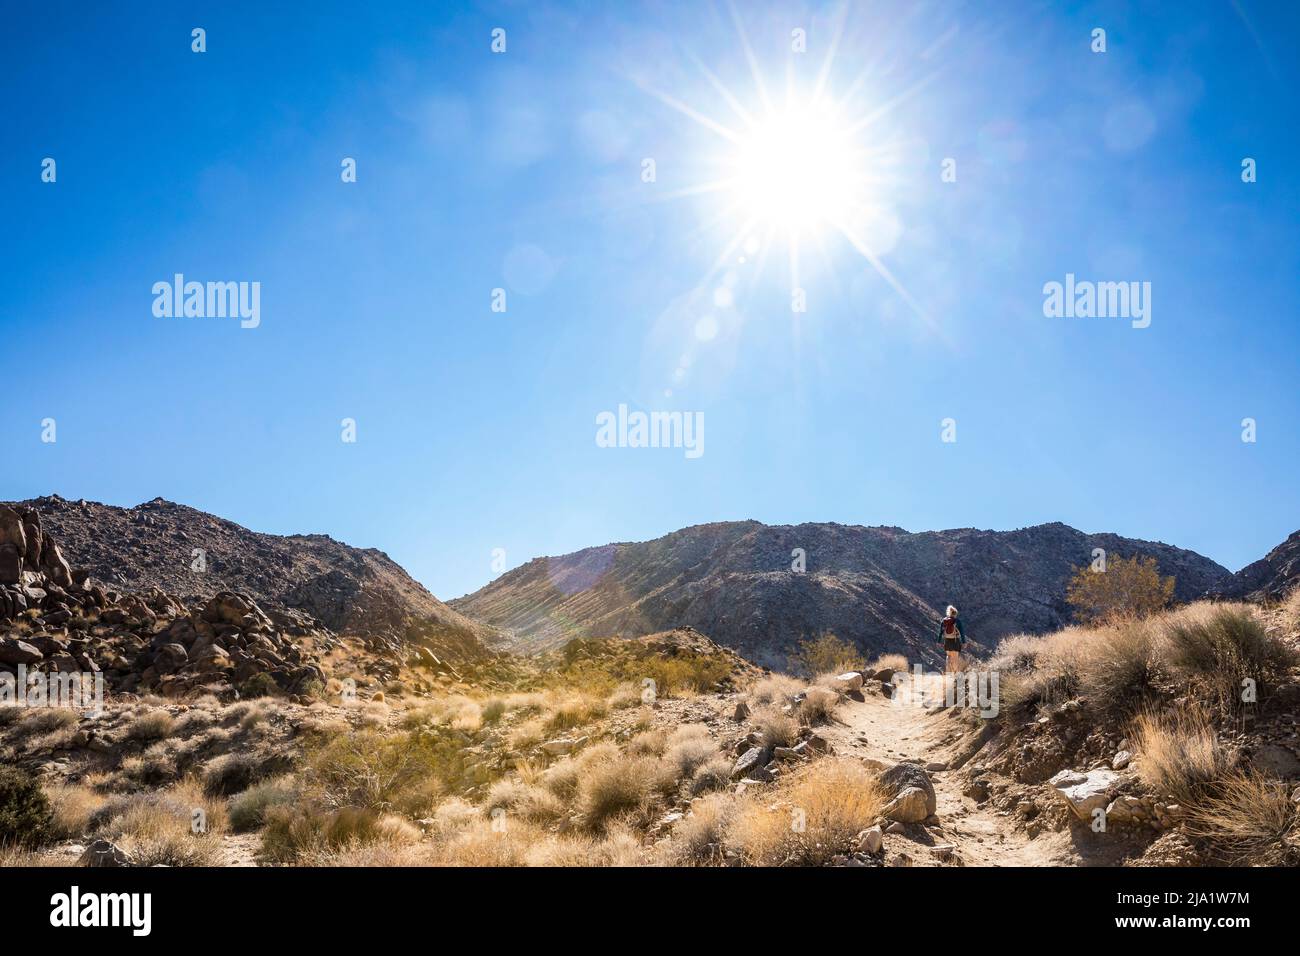 A woman hiking on the trail to Fortynine Palms Desert Oasis in Joshua Tree National Park. Stock Photo